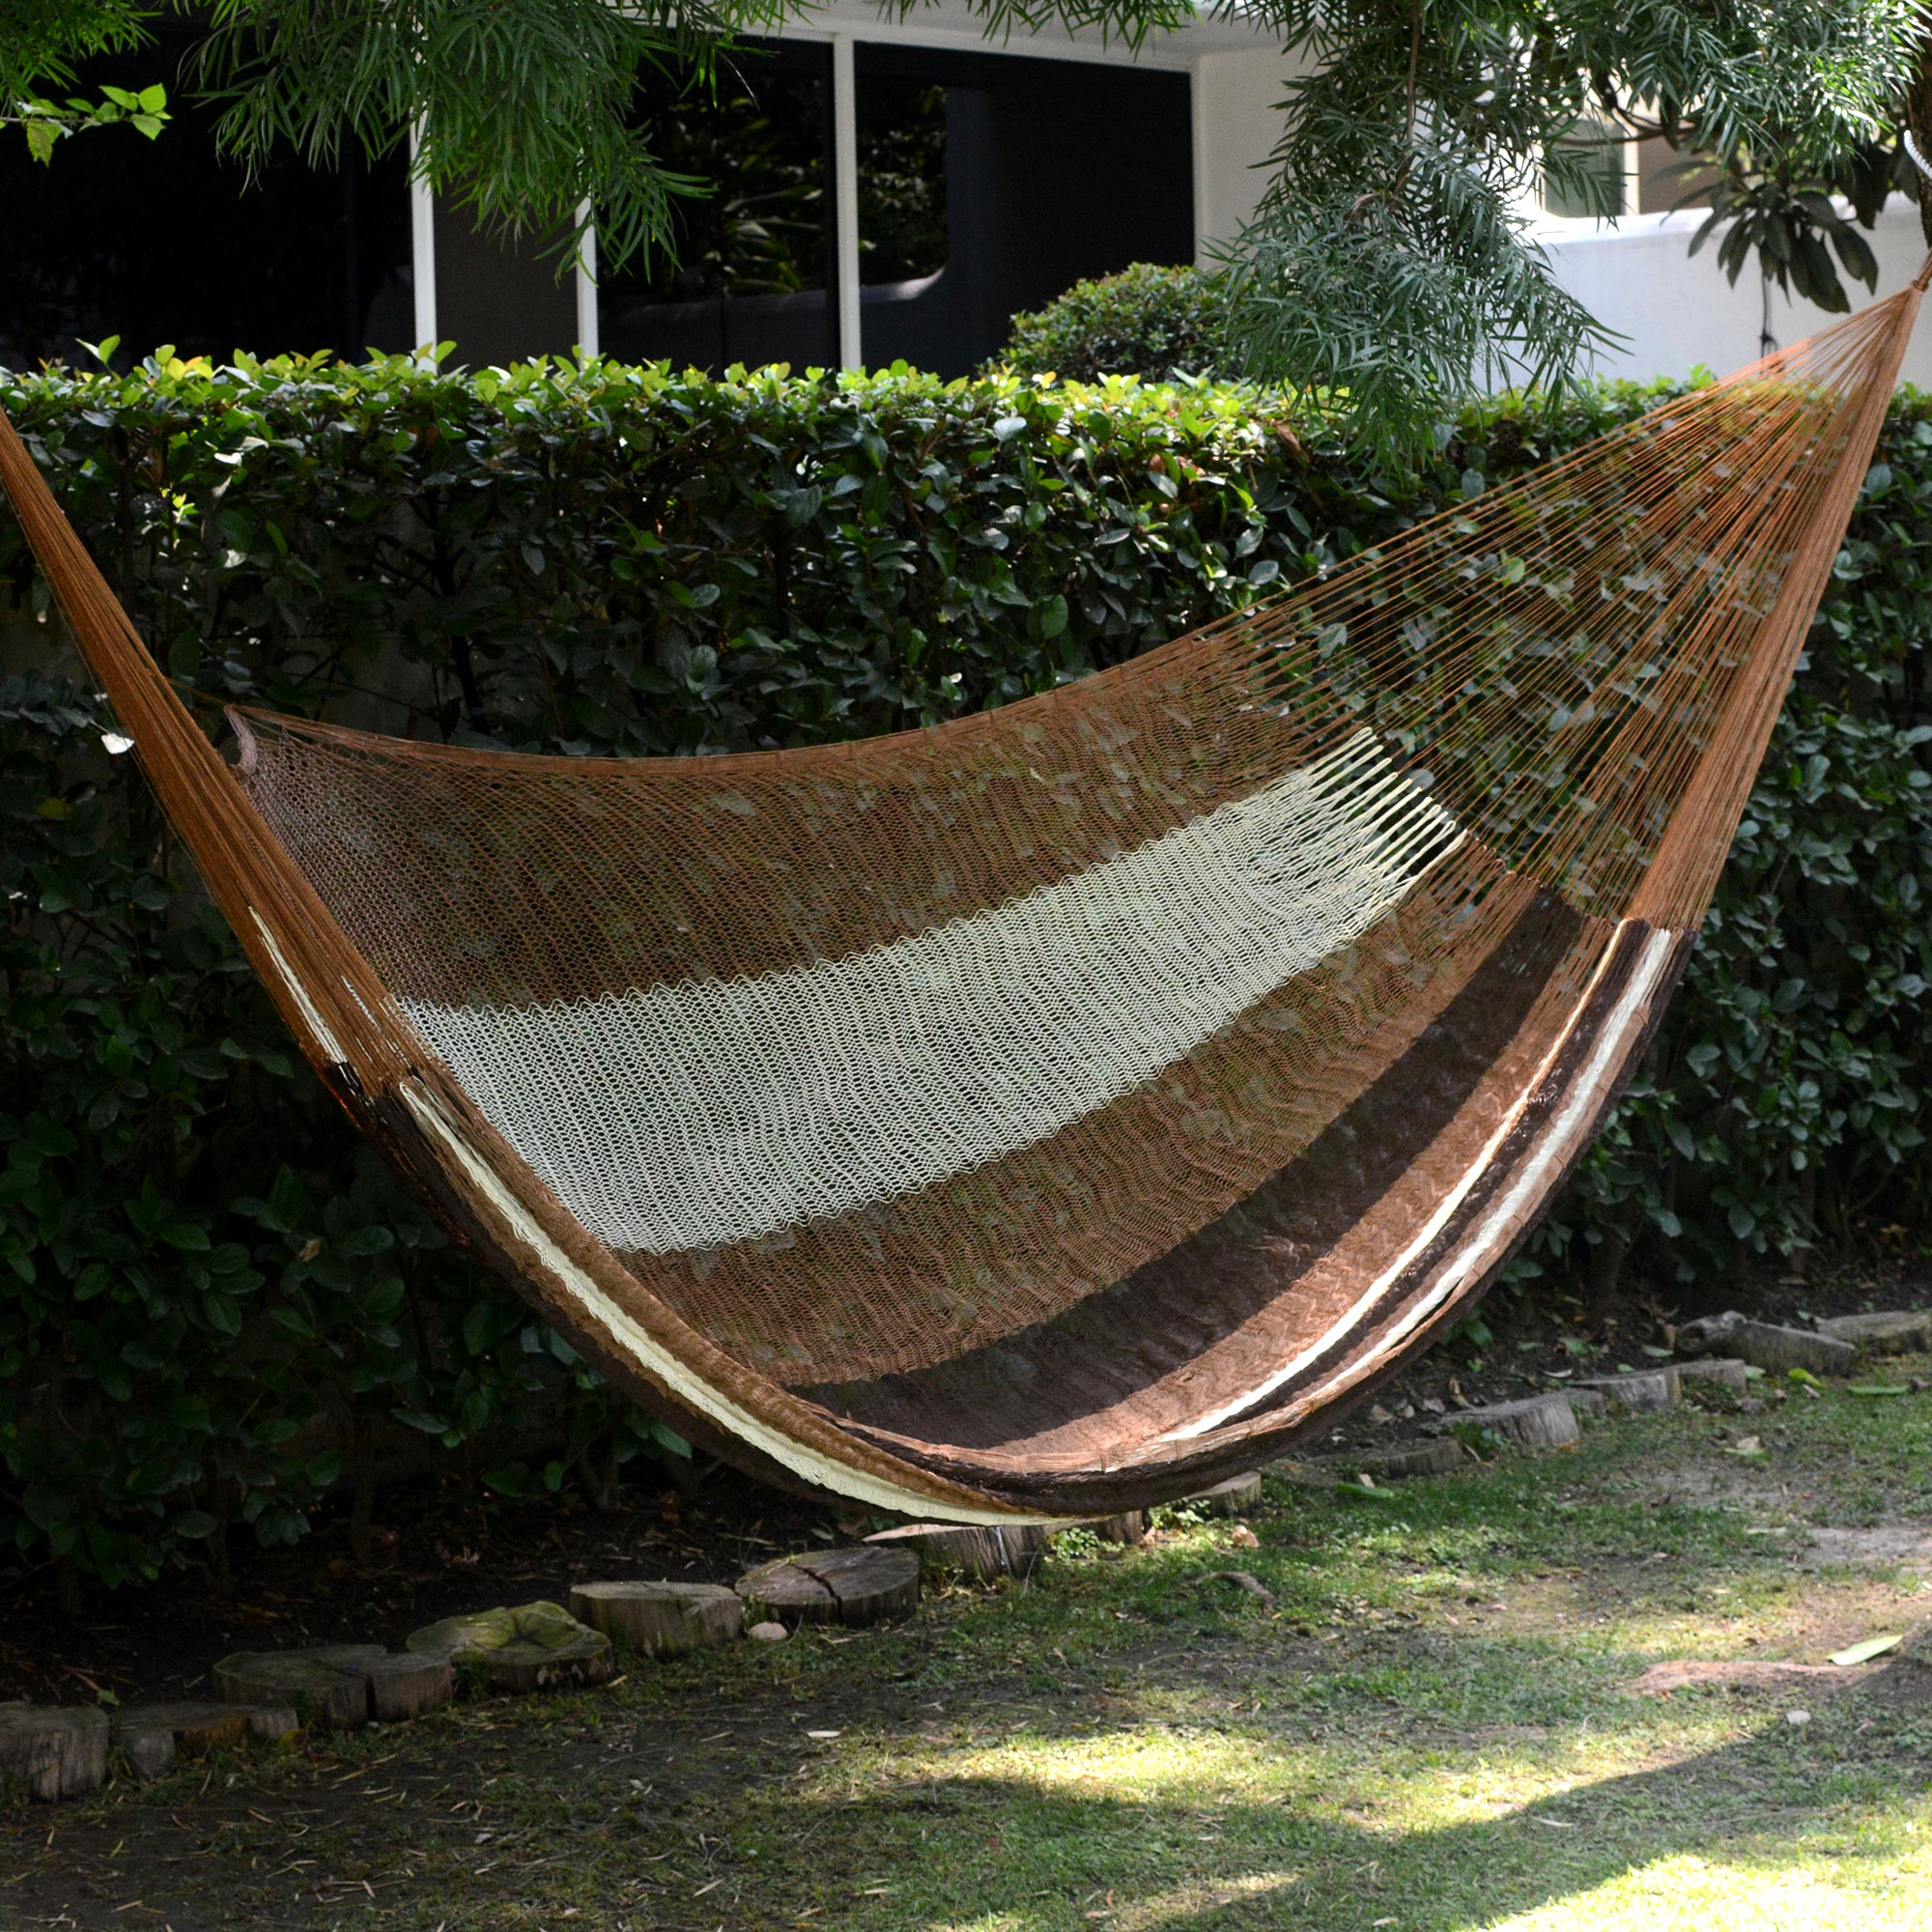 NOVICA Near The Sea Handwoven Mayan Striped Double Hammock In Brown From Mexico